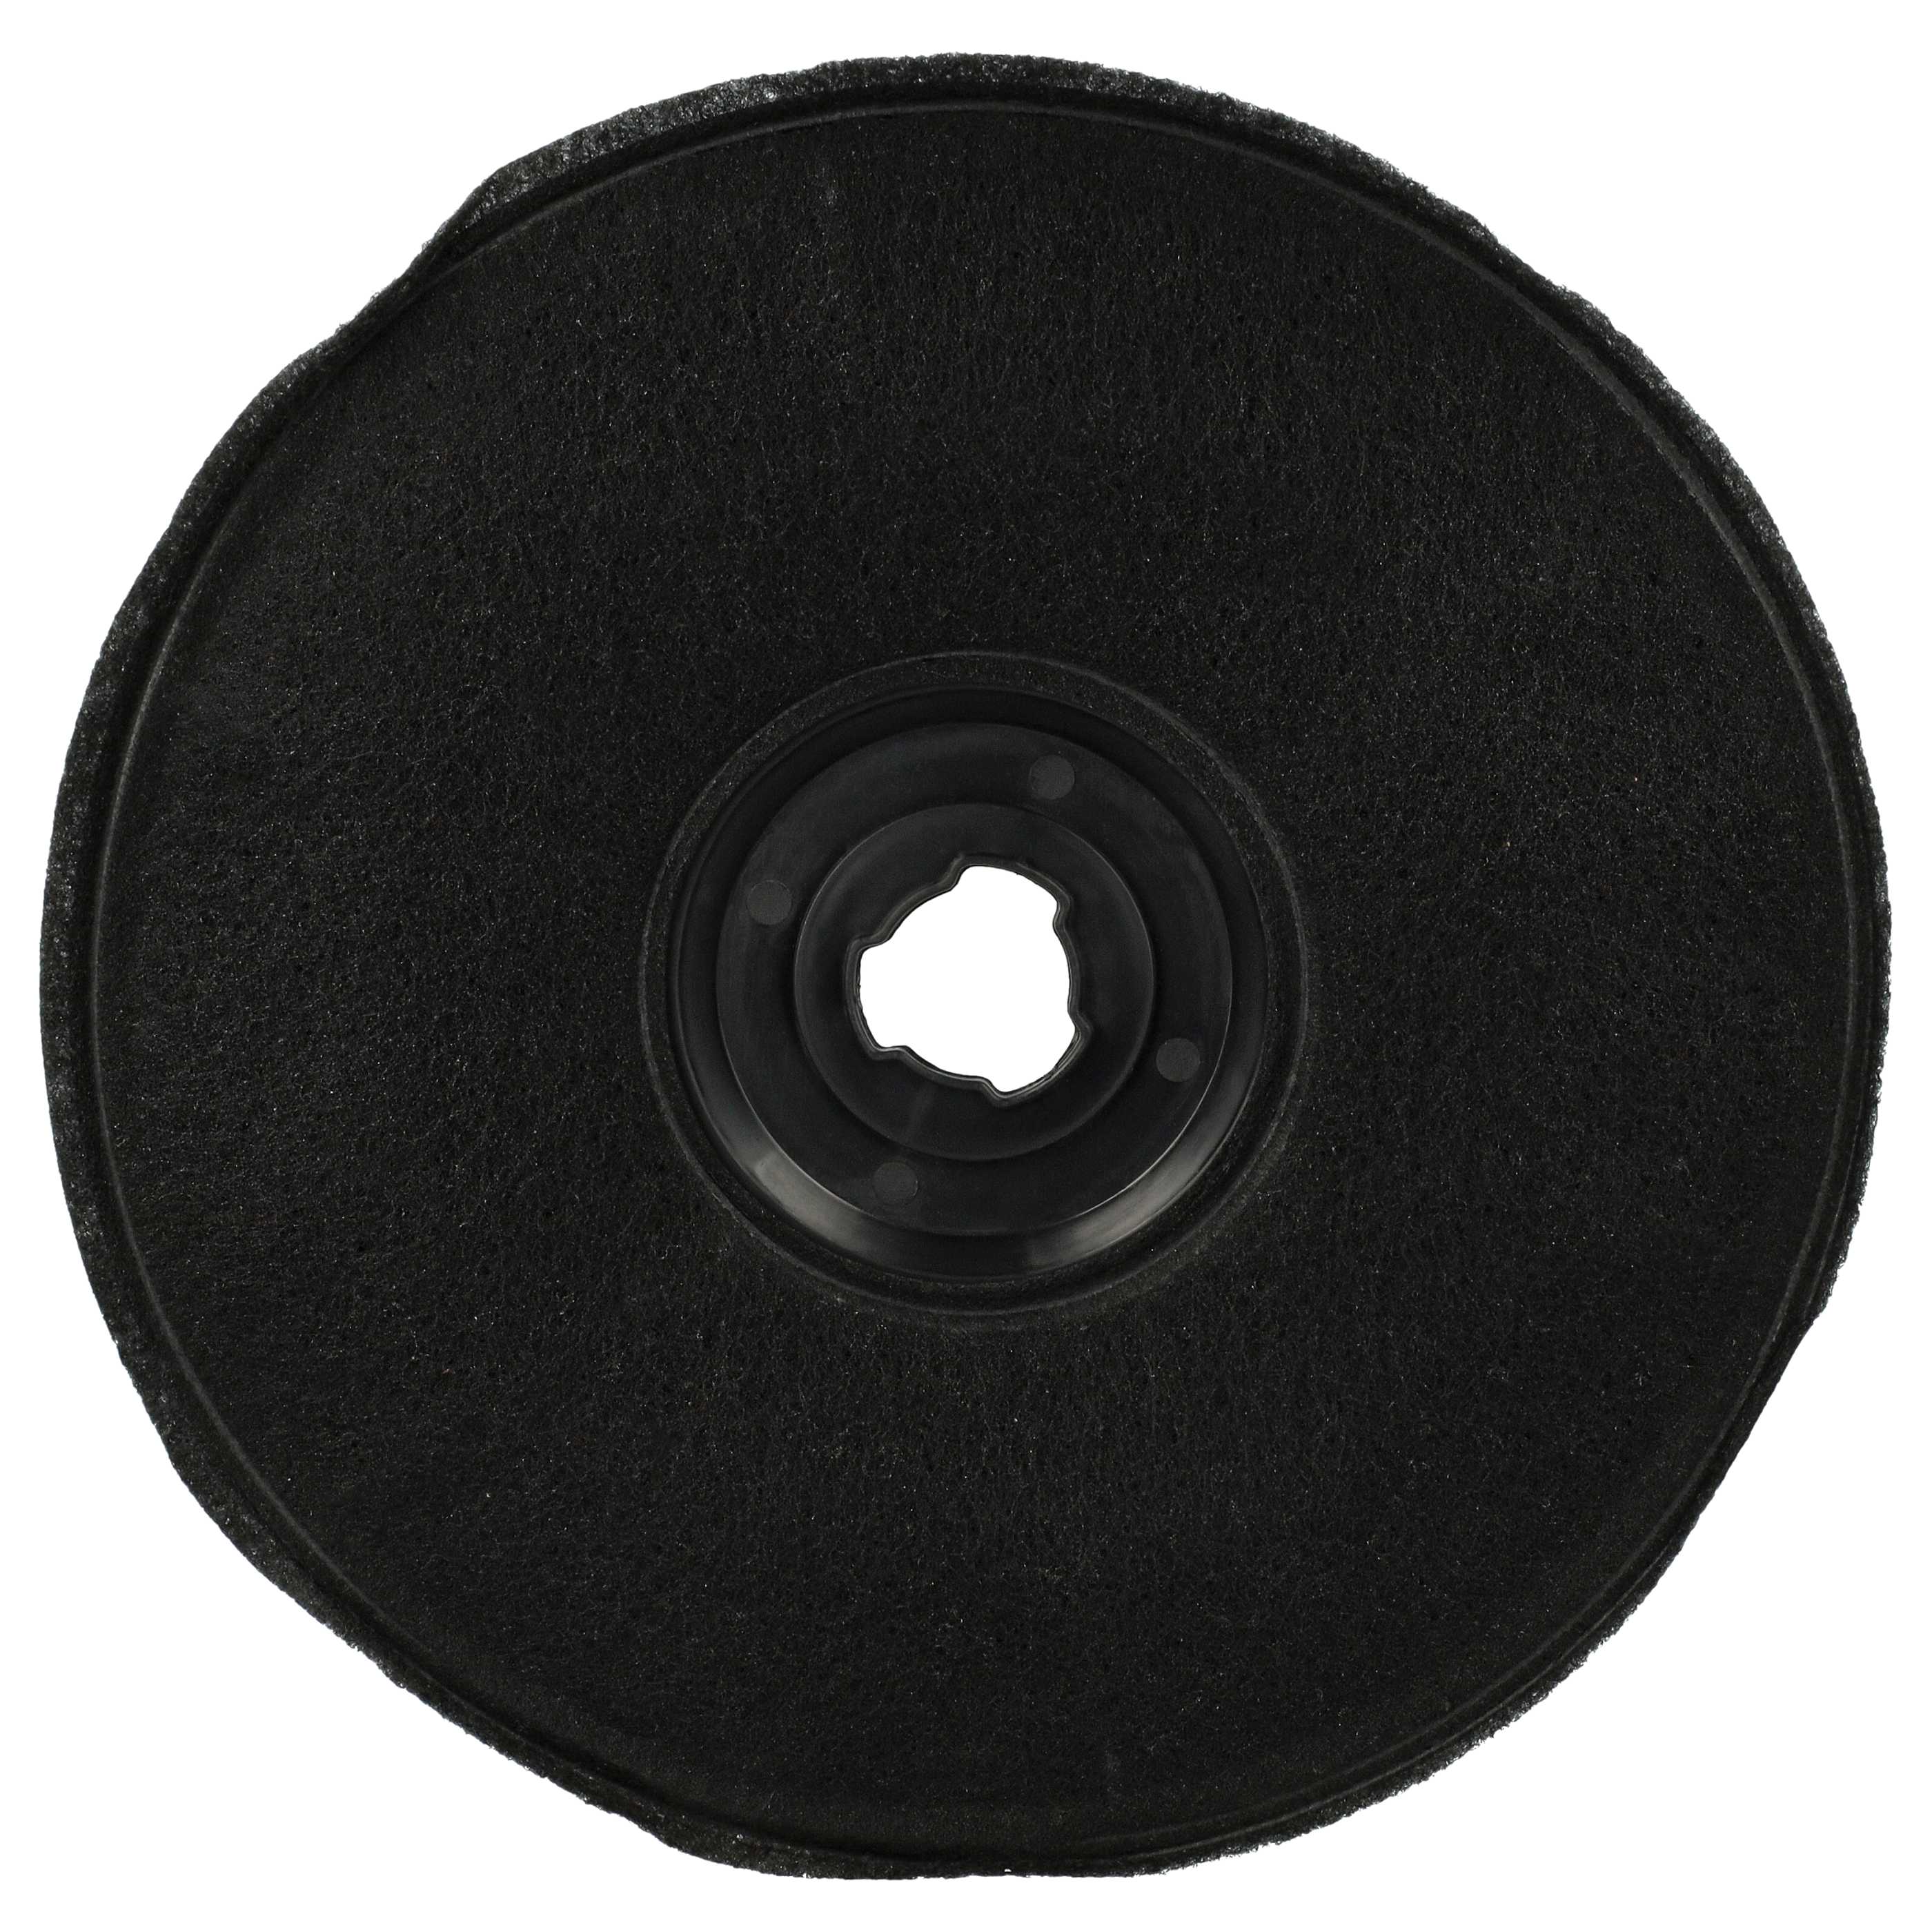 Activated Carbon Filter as Replacement for Typ E233, 9029793594 for Zanussi Hob etc. - 23 cm